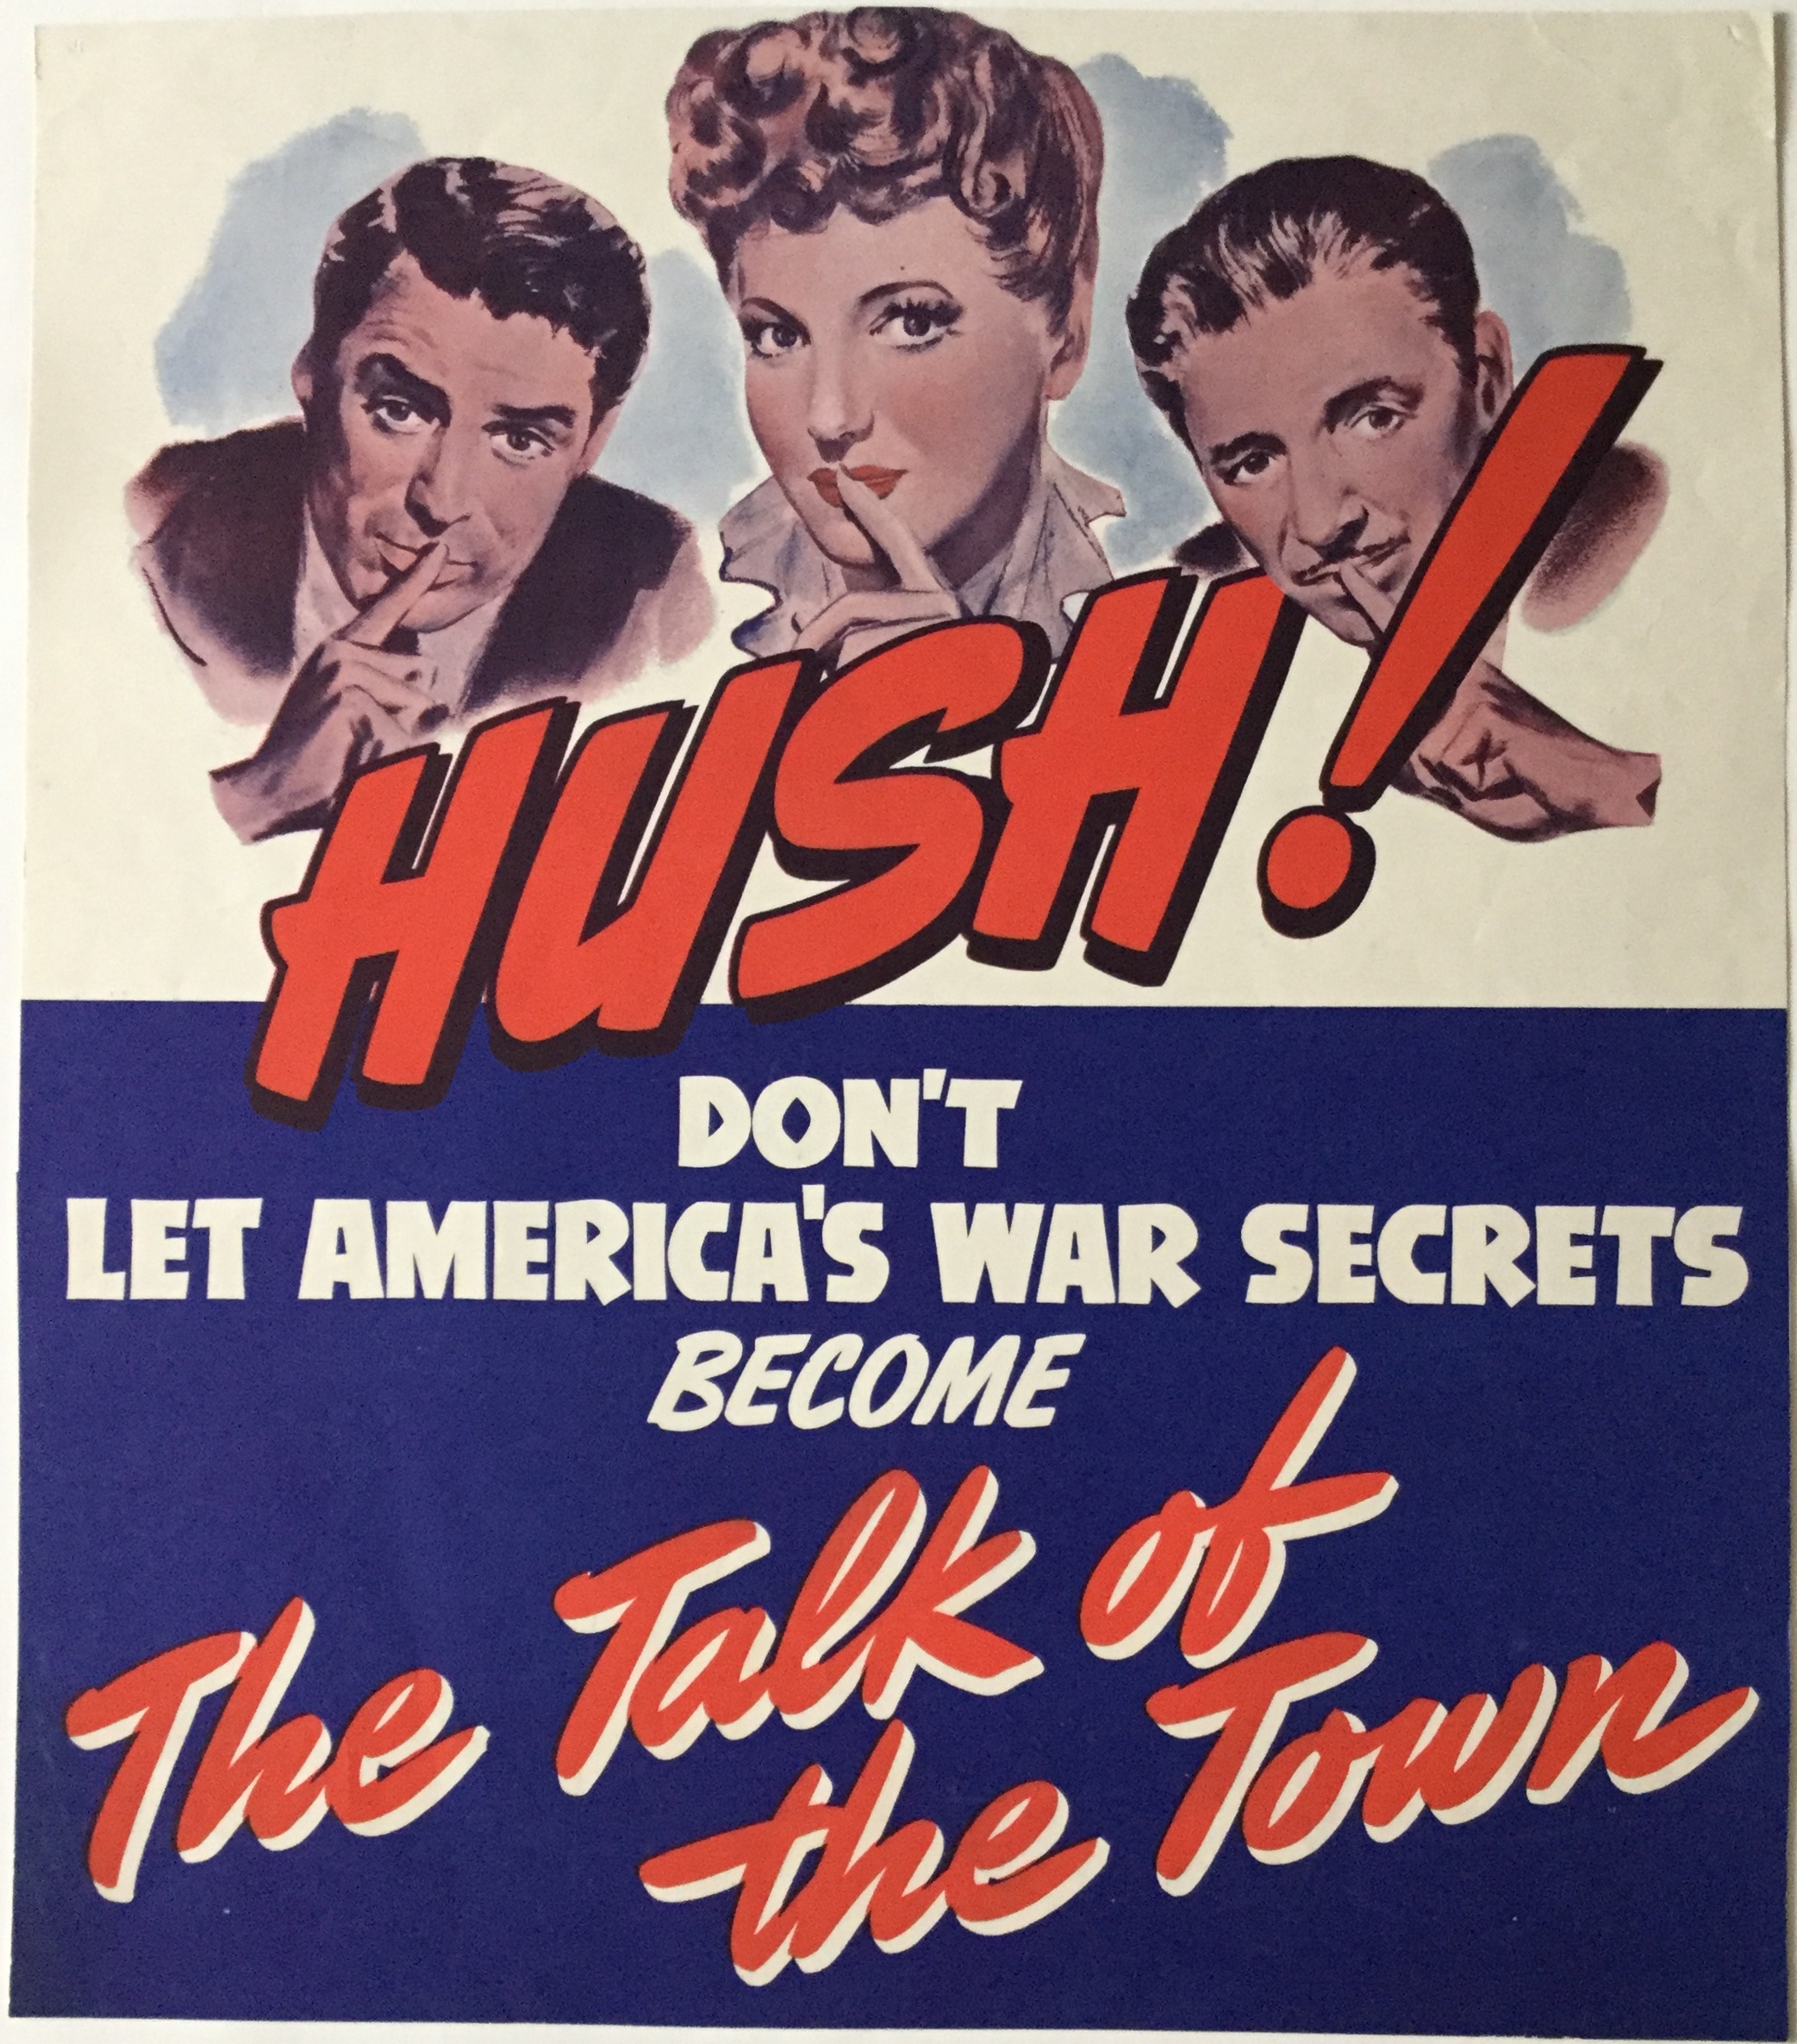 PB0744 HUSH! DON’T LET AMERICA’S WAR SECRETS BECOME THE TALK OF THE TOWN